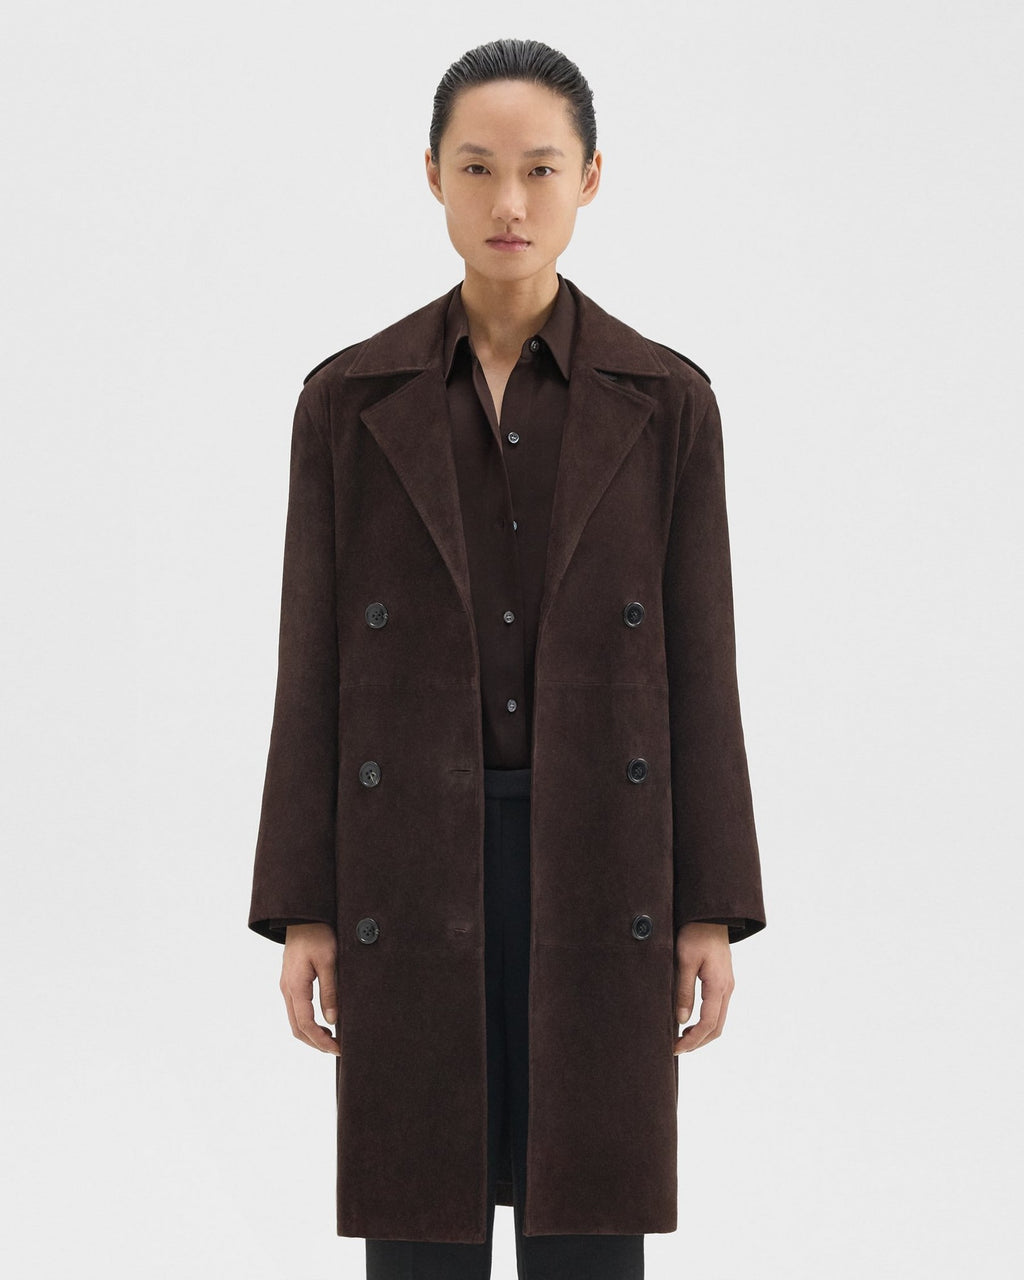 Theory Utility Trench Coat in Suede